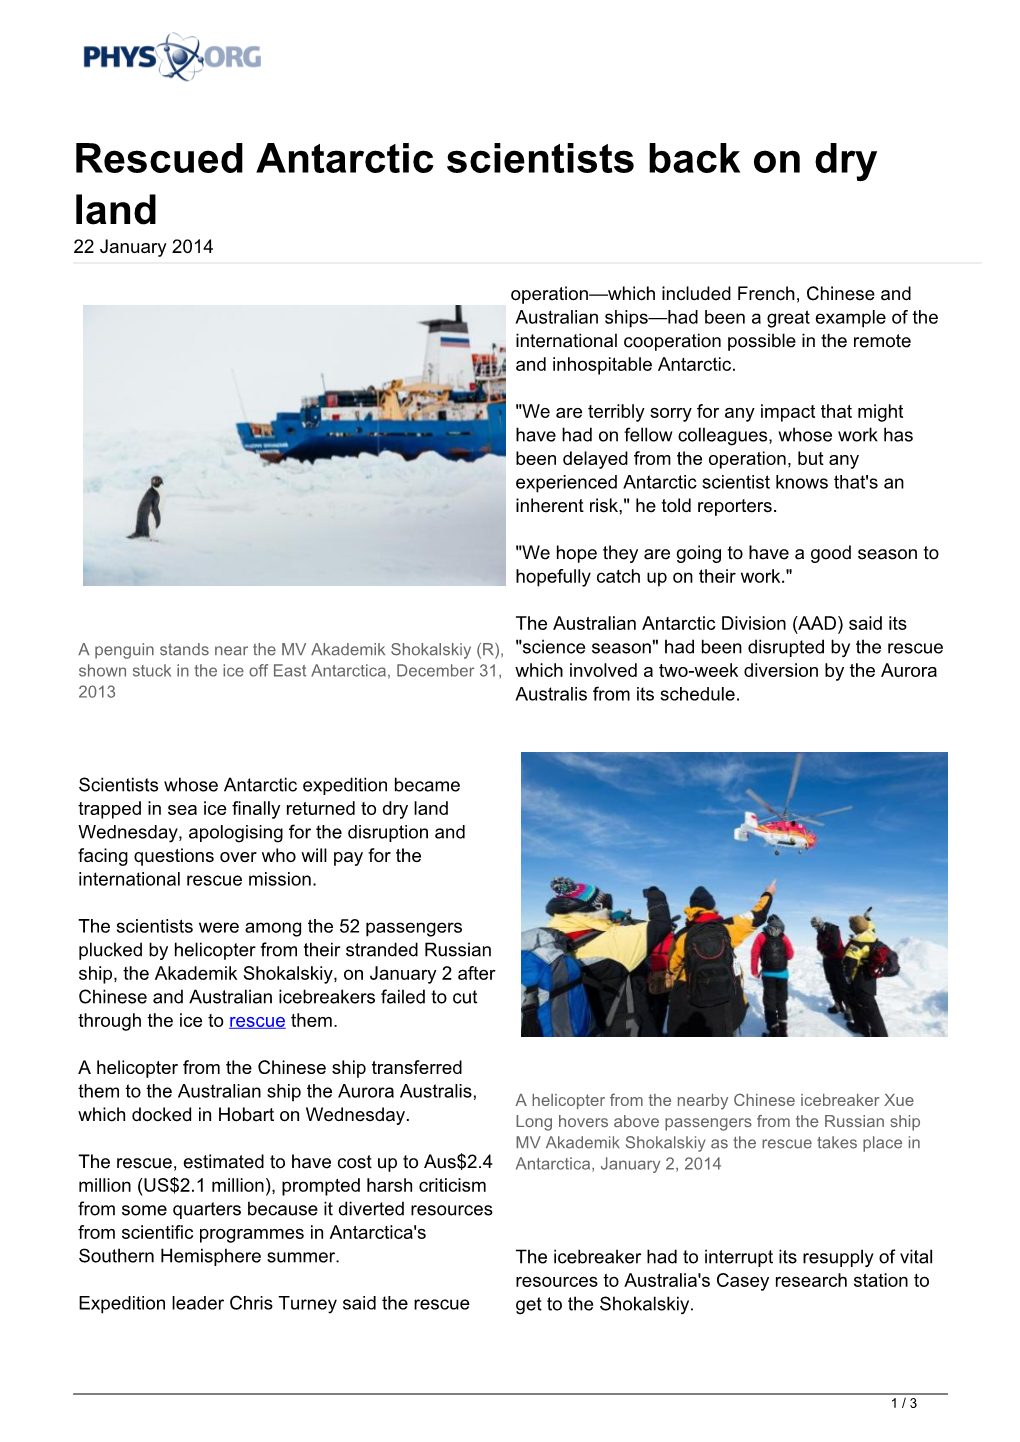 Rescued Antarctic Scientists Back on Dry Land 22 January 2014